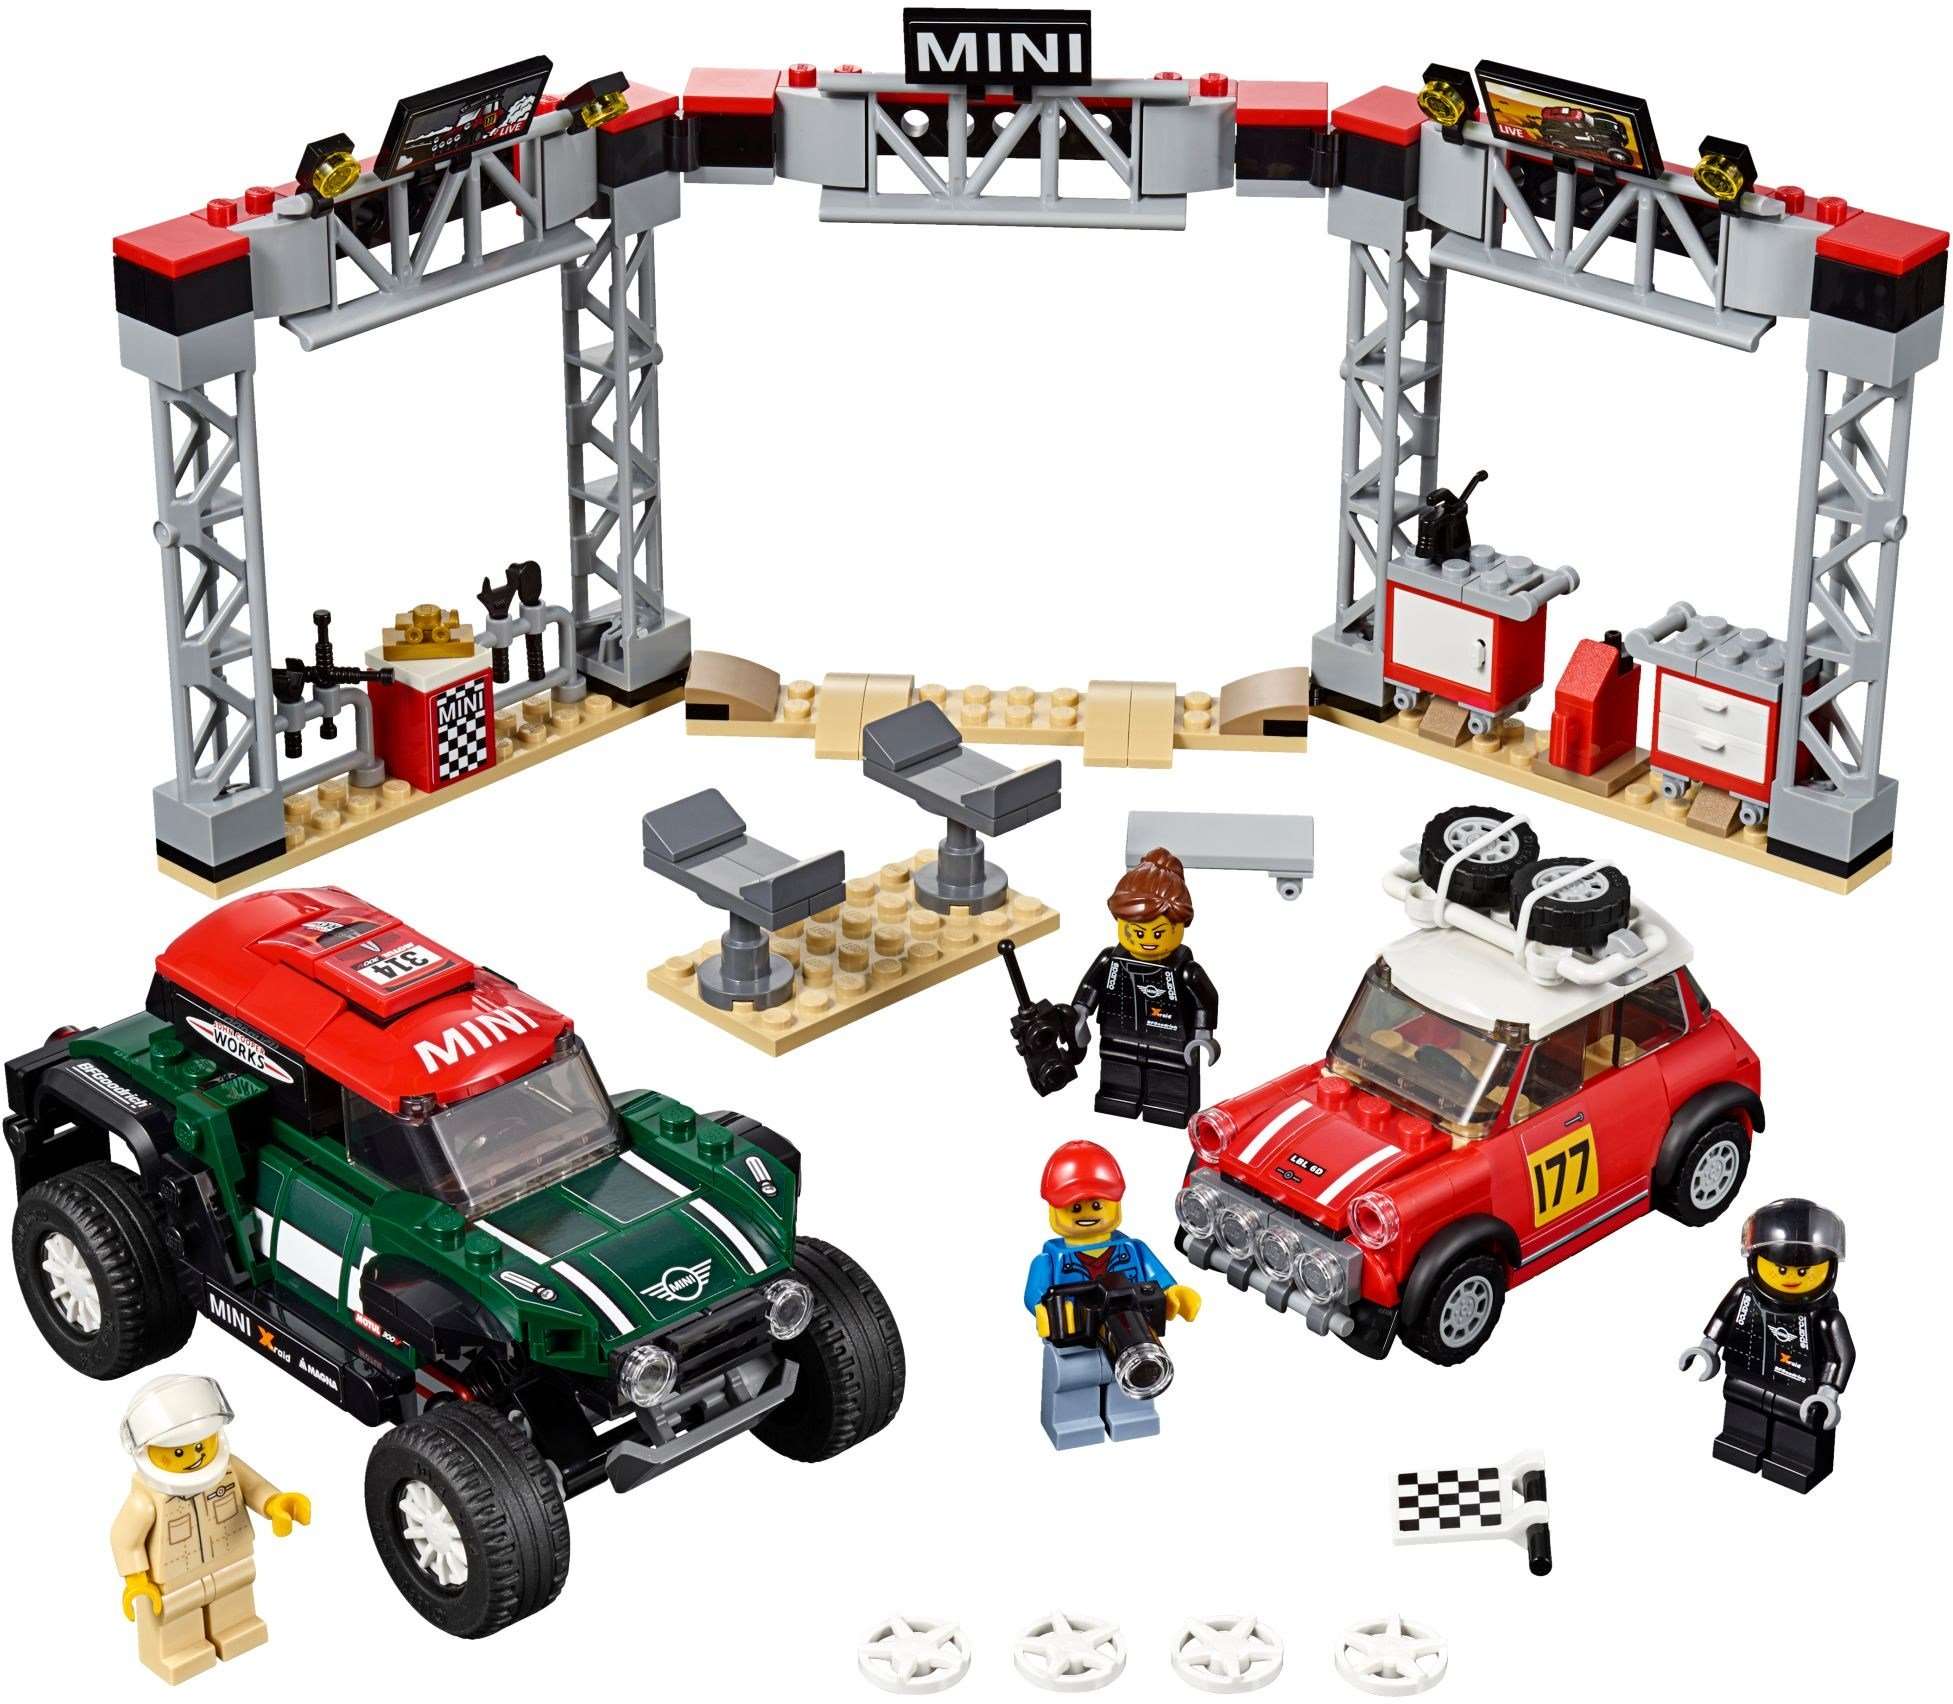 LEGO Speed Champions - 1967 Mini Cooper S Rally and 2018 MINI John Cooper Works Buggy (75894)